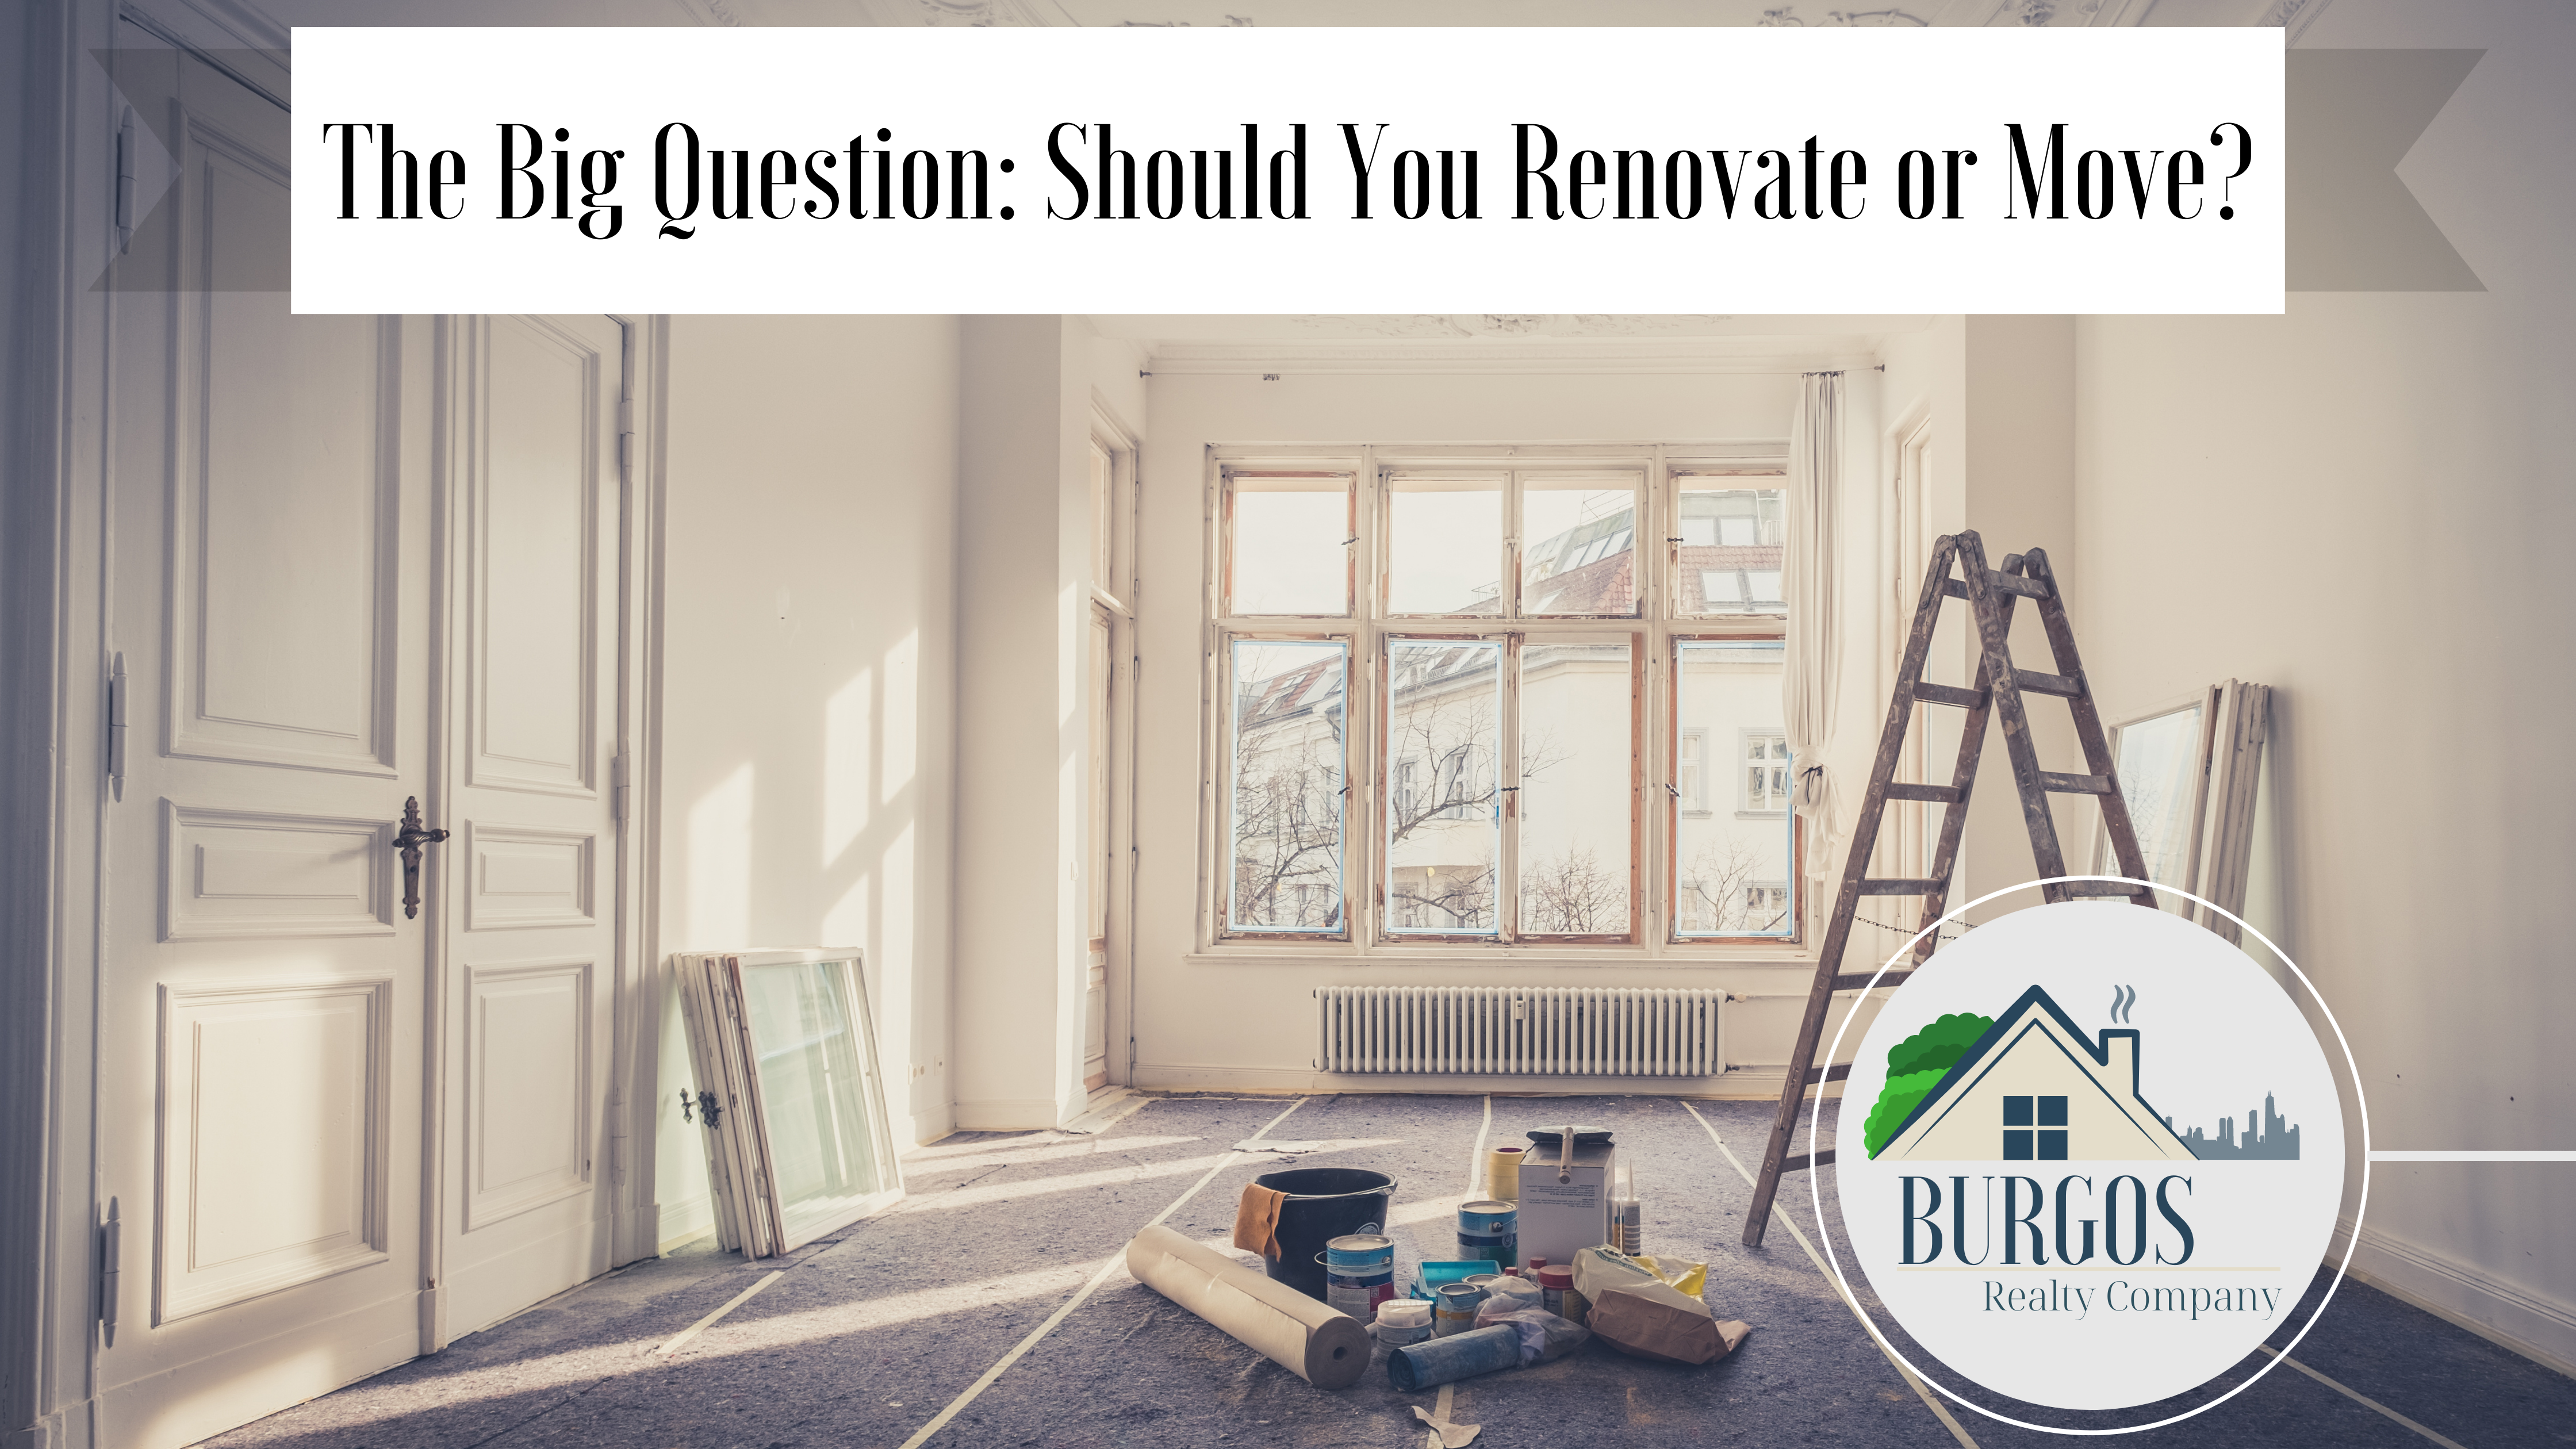 The Big Question: Should Your Renovate or Move?